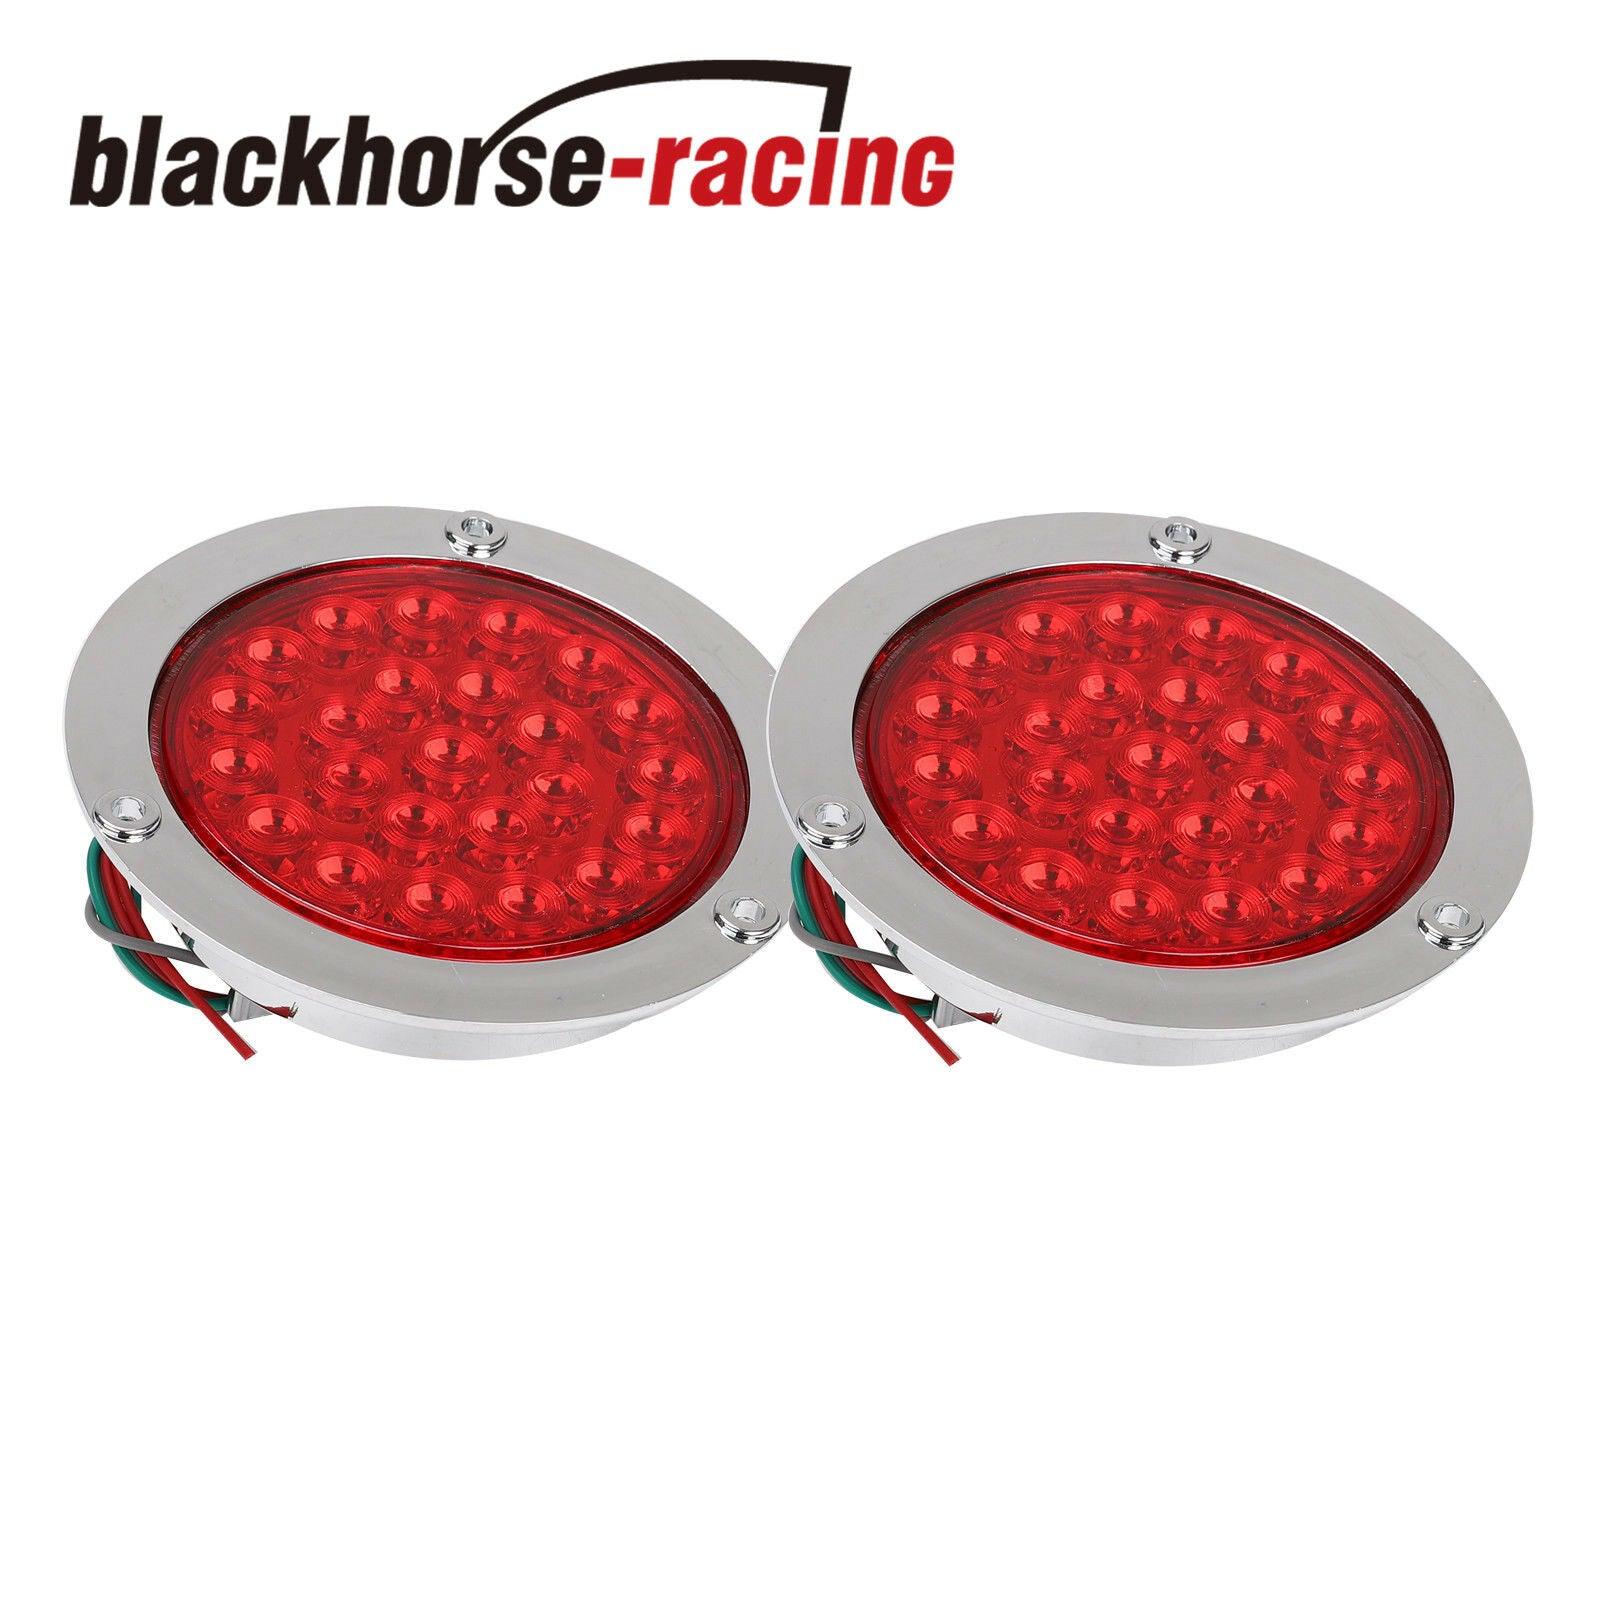 2X Red 4'' Round 24 LED Truck Trailer Stop Turn Tail Brake Lights Stainless Rings - www.blackhorse-racing.com